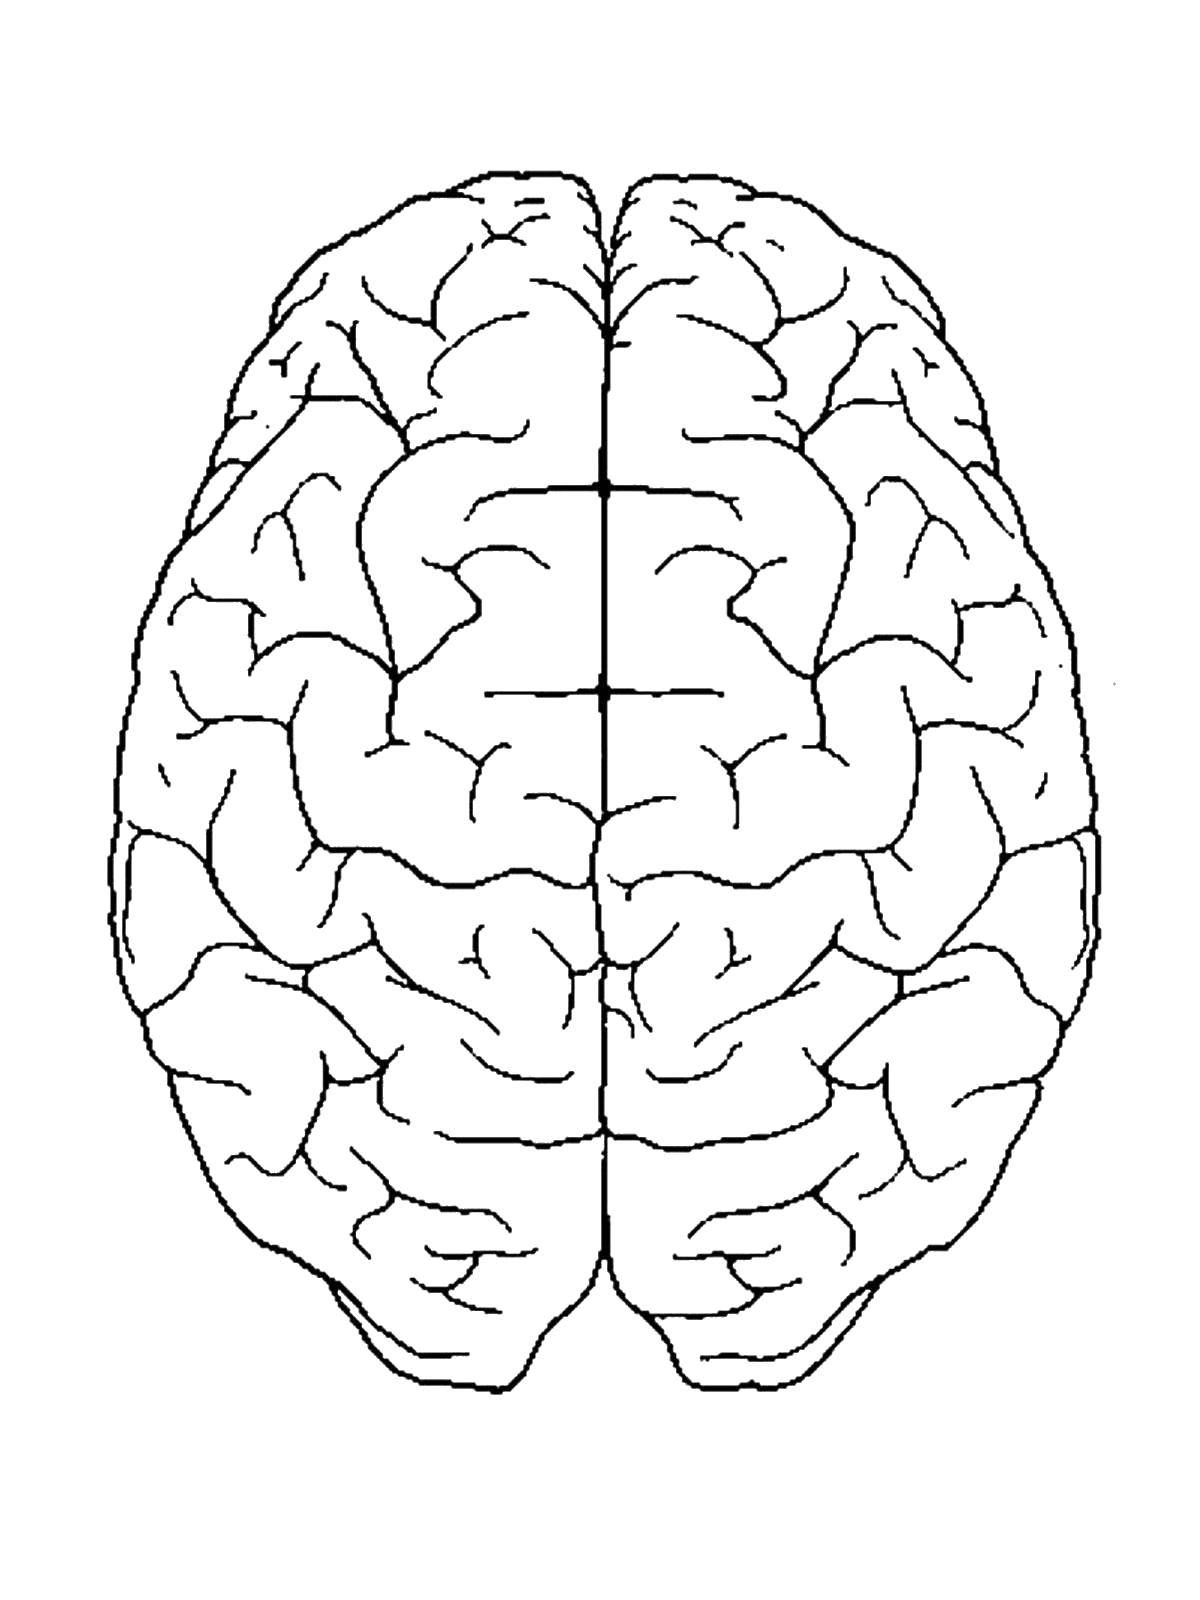 Coloring The brain. Category The structure of the body. Tags:  The body , the brain.